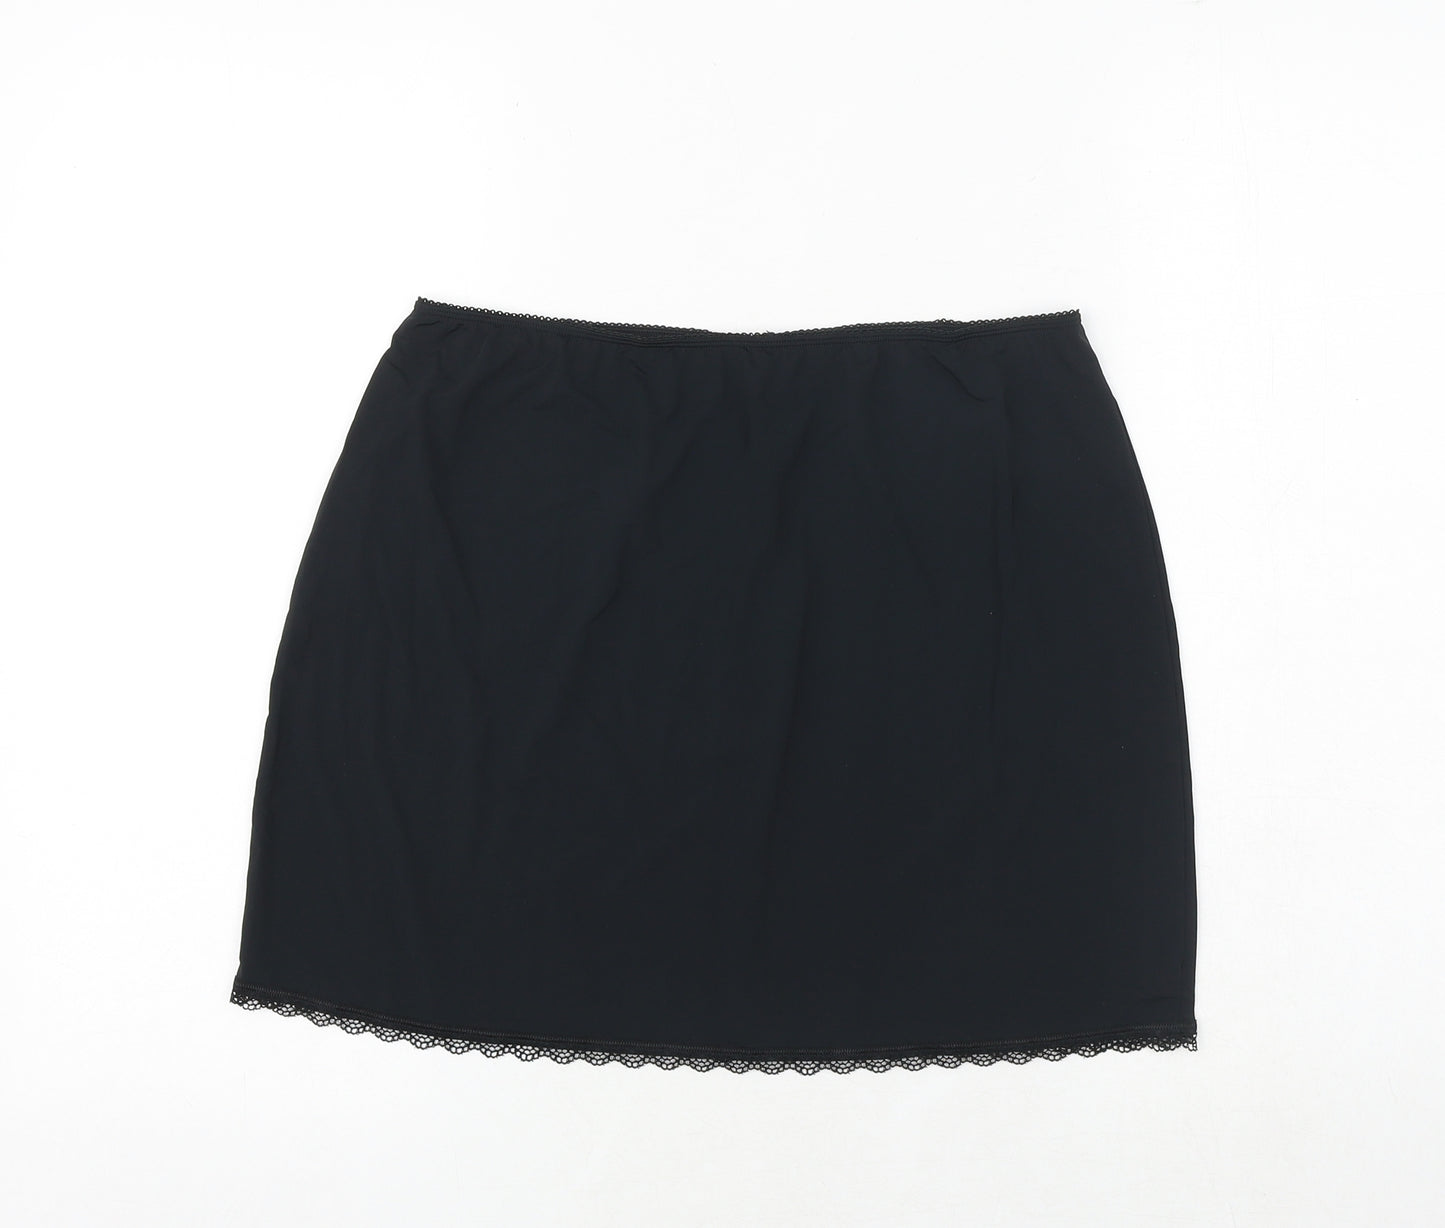 Marks and Spencer Womens Black Polyester A-Line Skirt Size 14 - Lace Trim